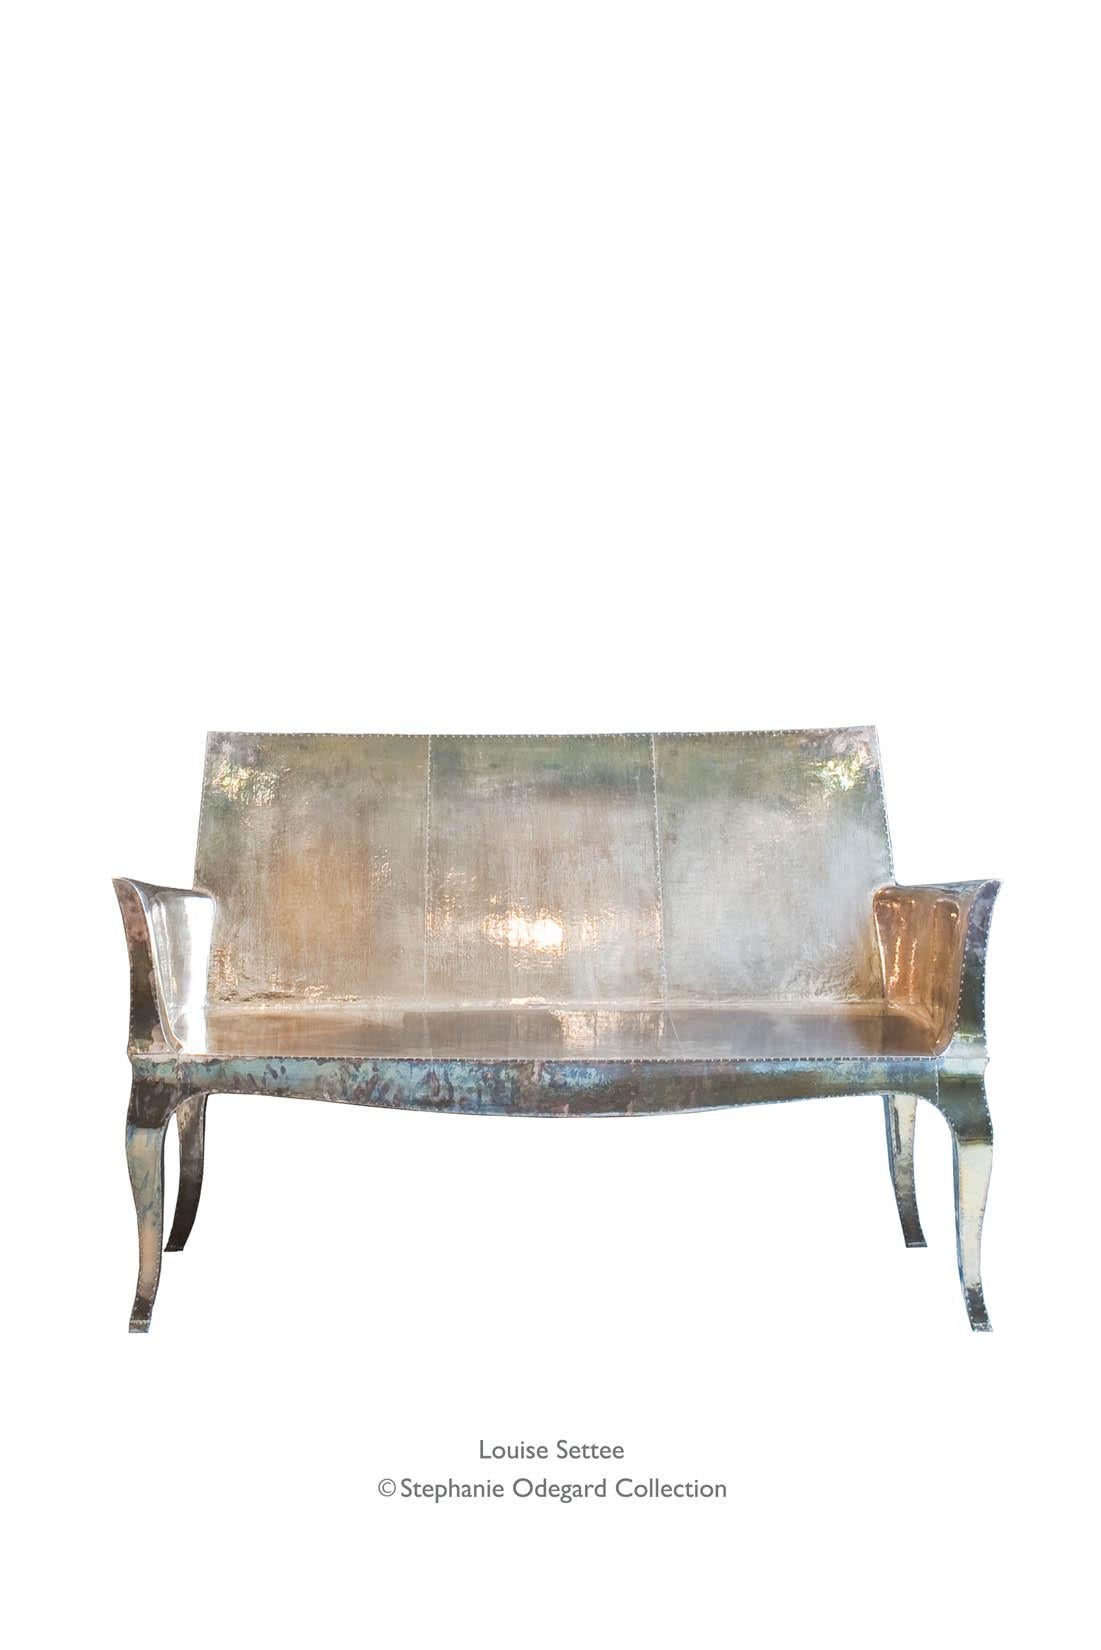 Louise Settee Art Deco Benches in Mid. Hammered White Bronze by Paul Mathieu For Sale 6